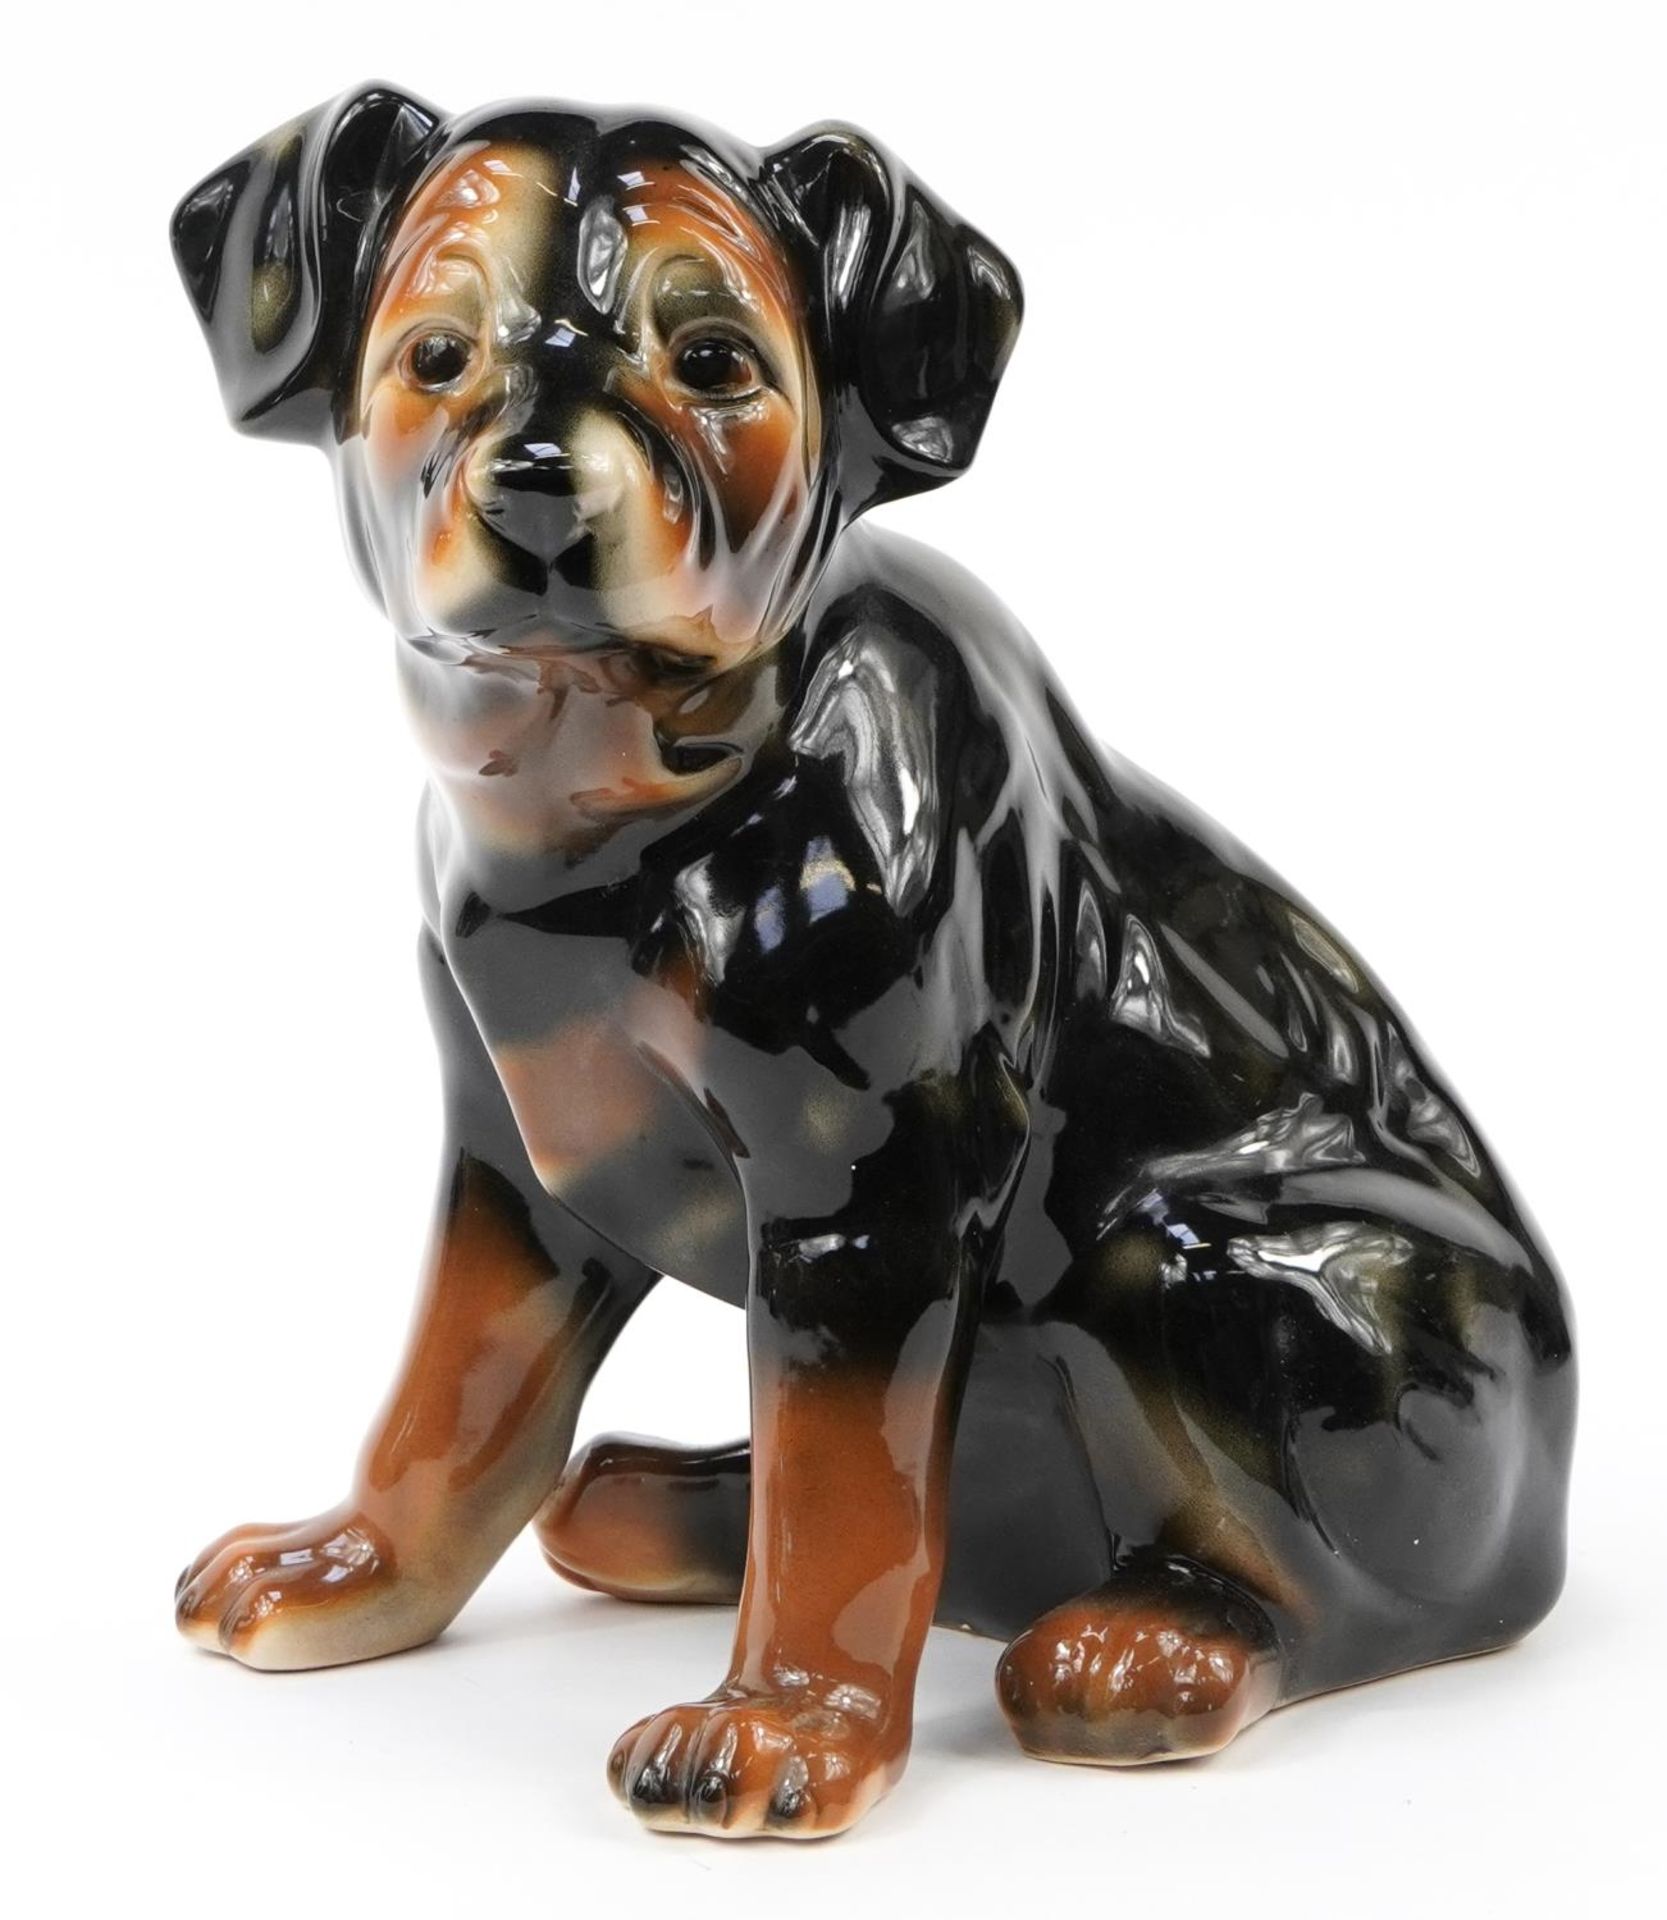 Large porcelain model of a seated dog, 39cm high : For further information on this lot please